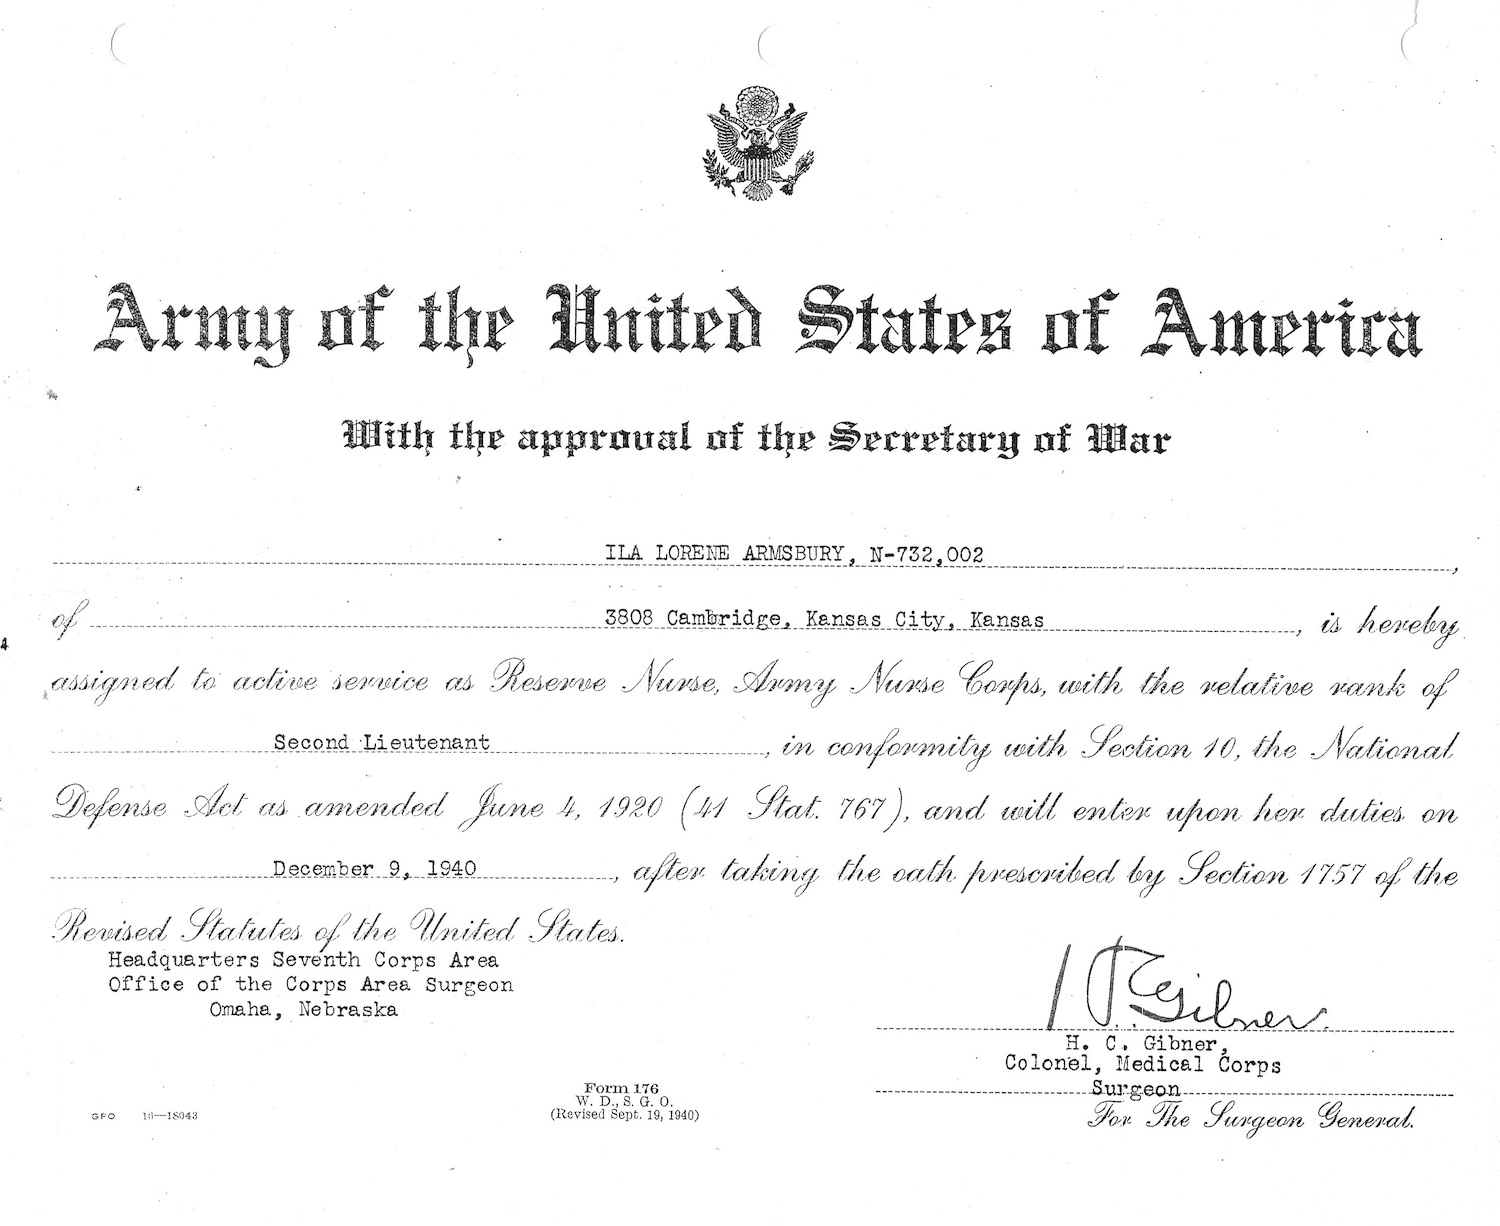 Document certifying that Ila Lorene Armsbury, with the approval of the Secretary of War, was assigned to active service as a reserve nurse in the Army Nurse Corps, December 9, 1940.